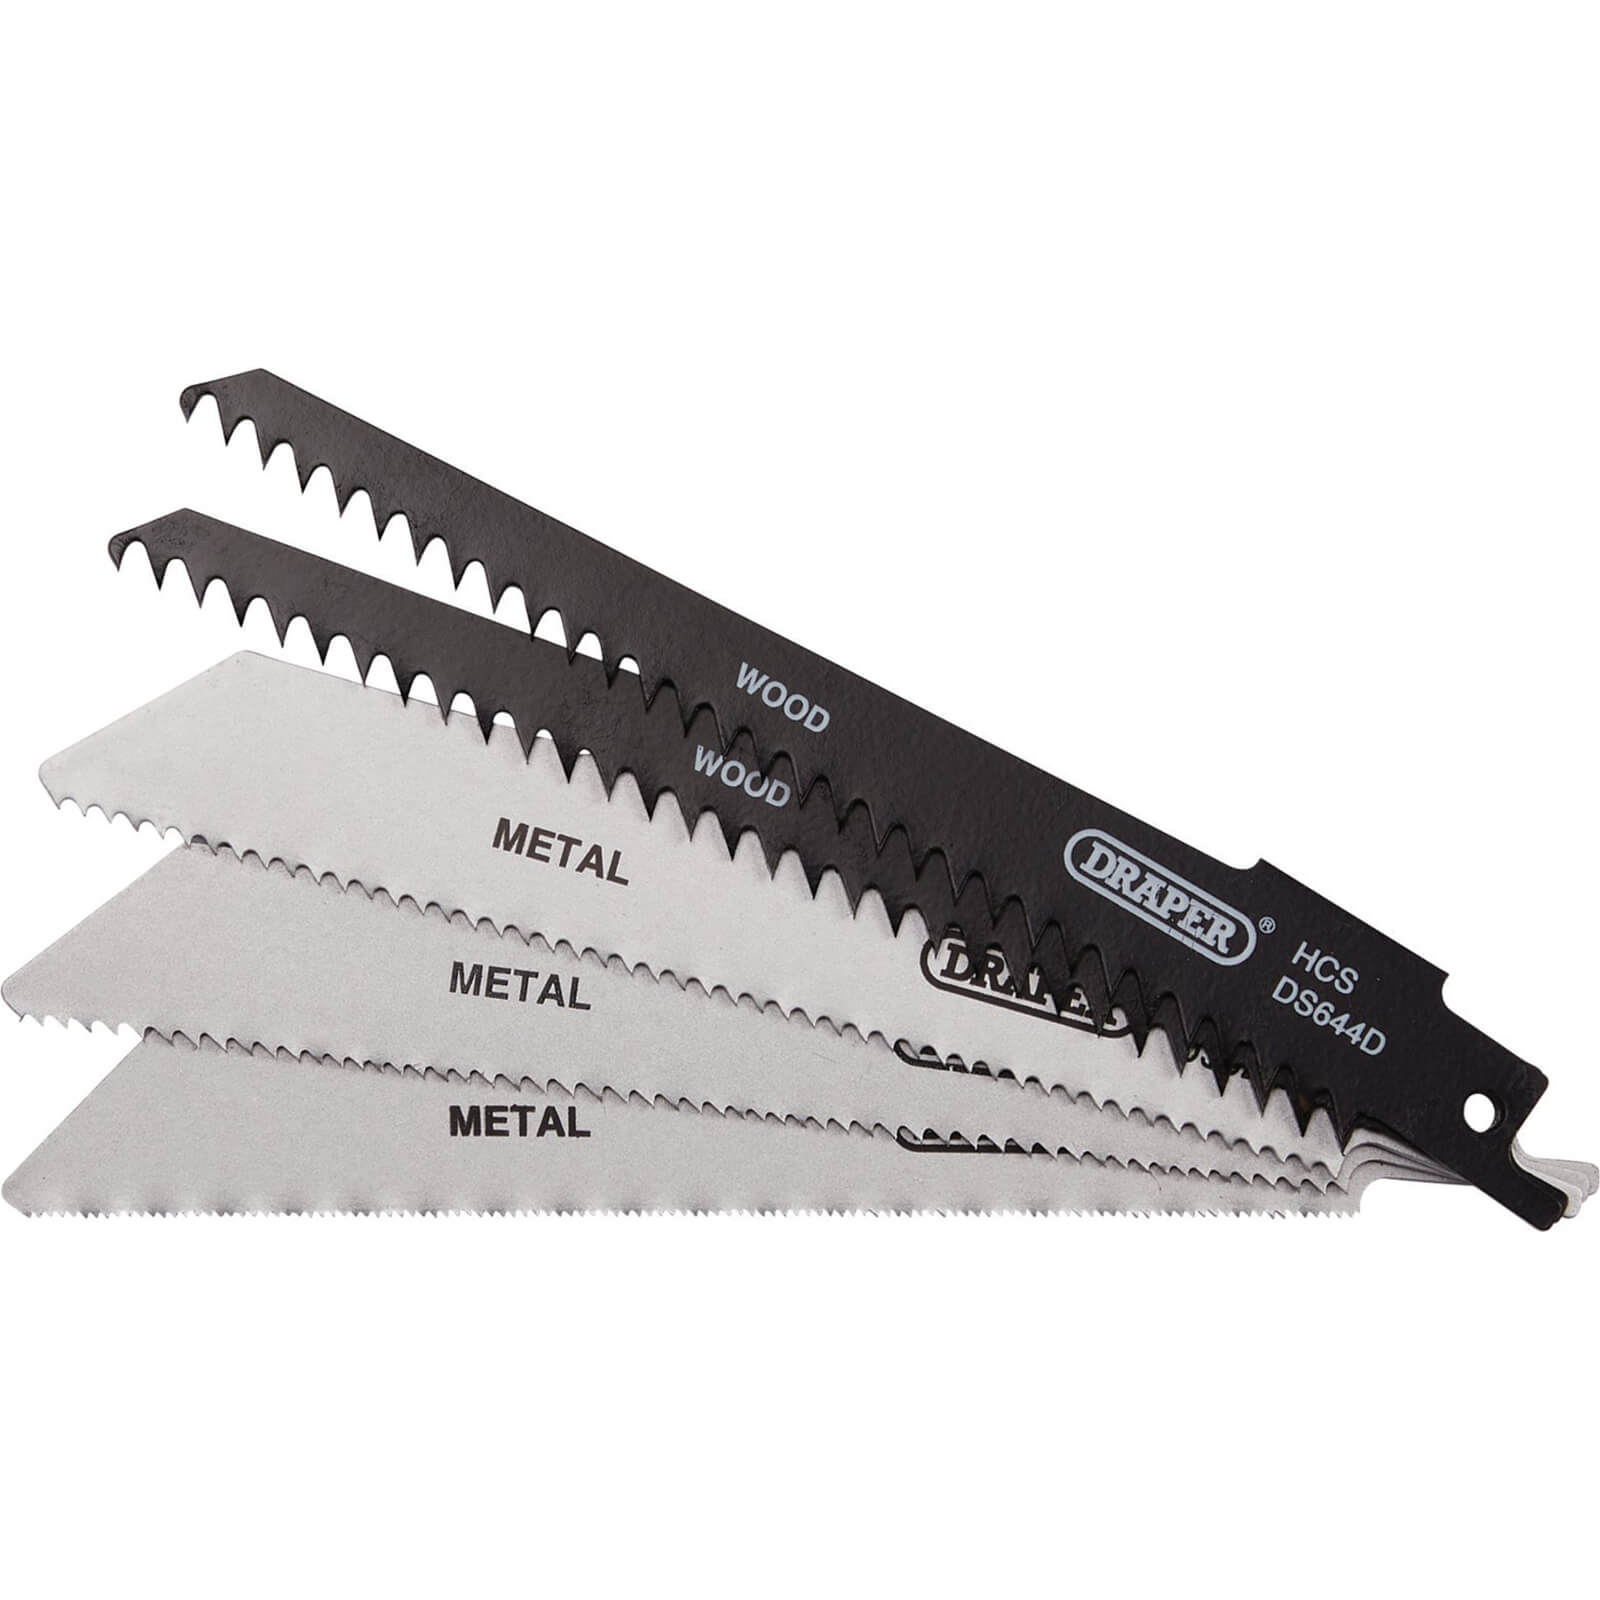 Photos - Power Tool Accessory Draper 5 Piece Wood and Metal Cutting Reciprocating Sabre Saw Blade Set RS 